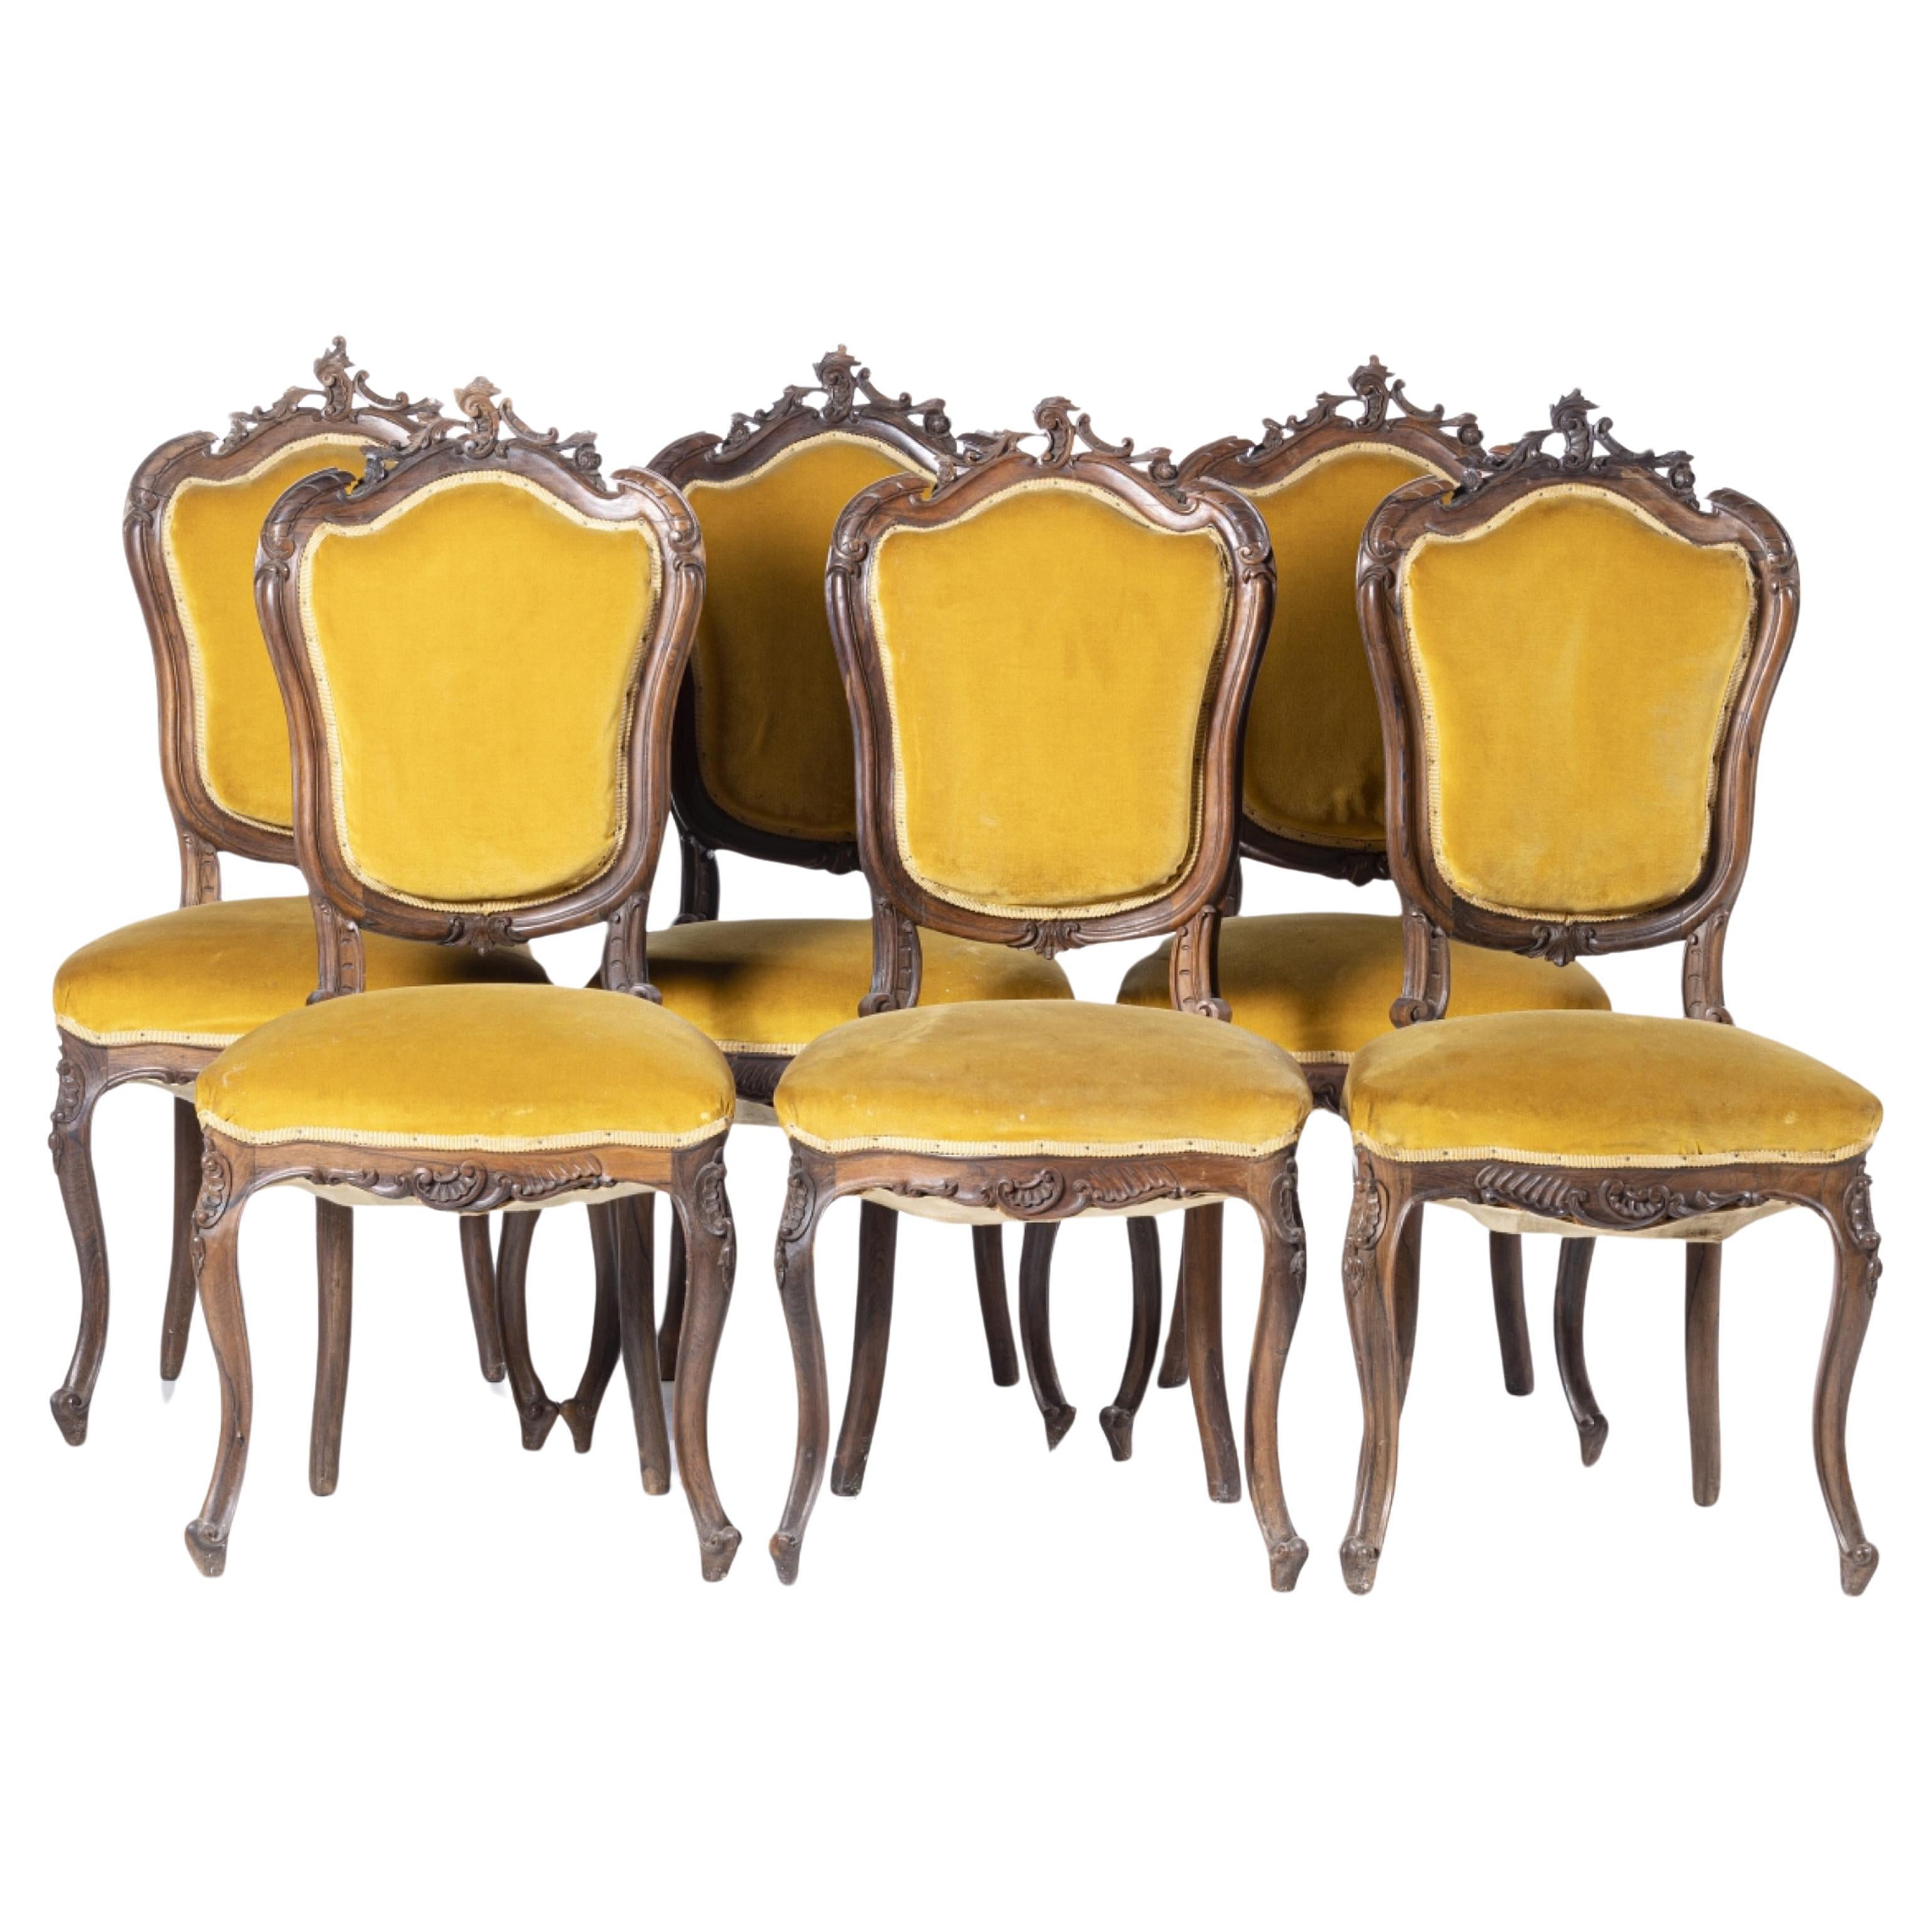 SET OF SIX LUIS XVI PORTUGUESE CHAIRS 19th Century For Sale